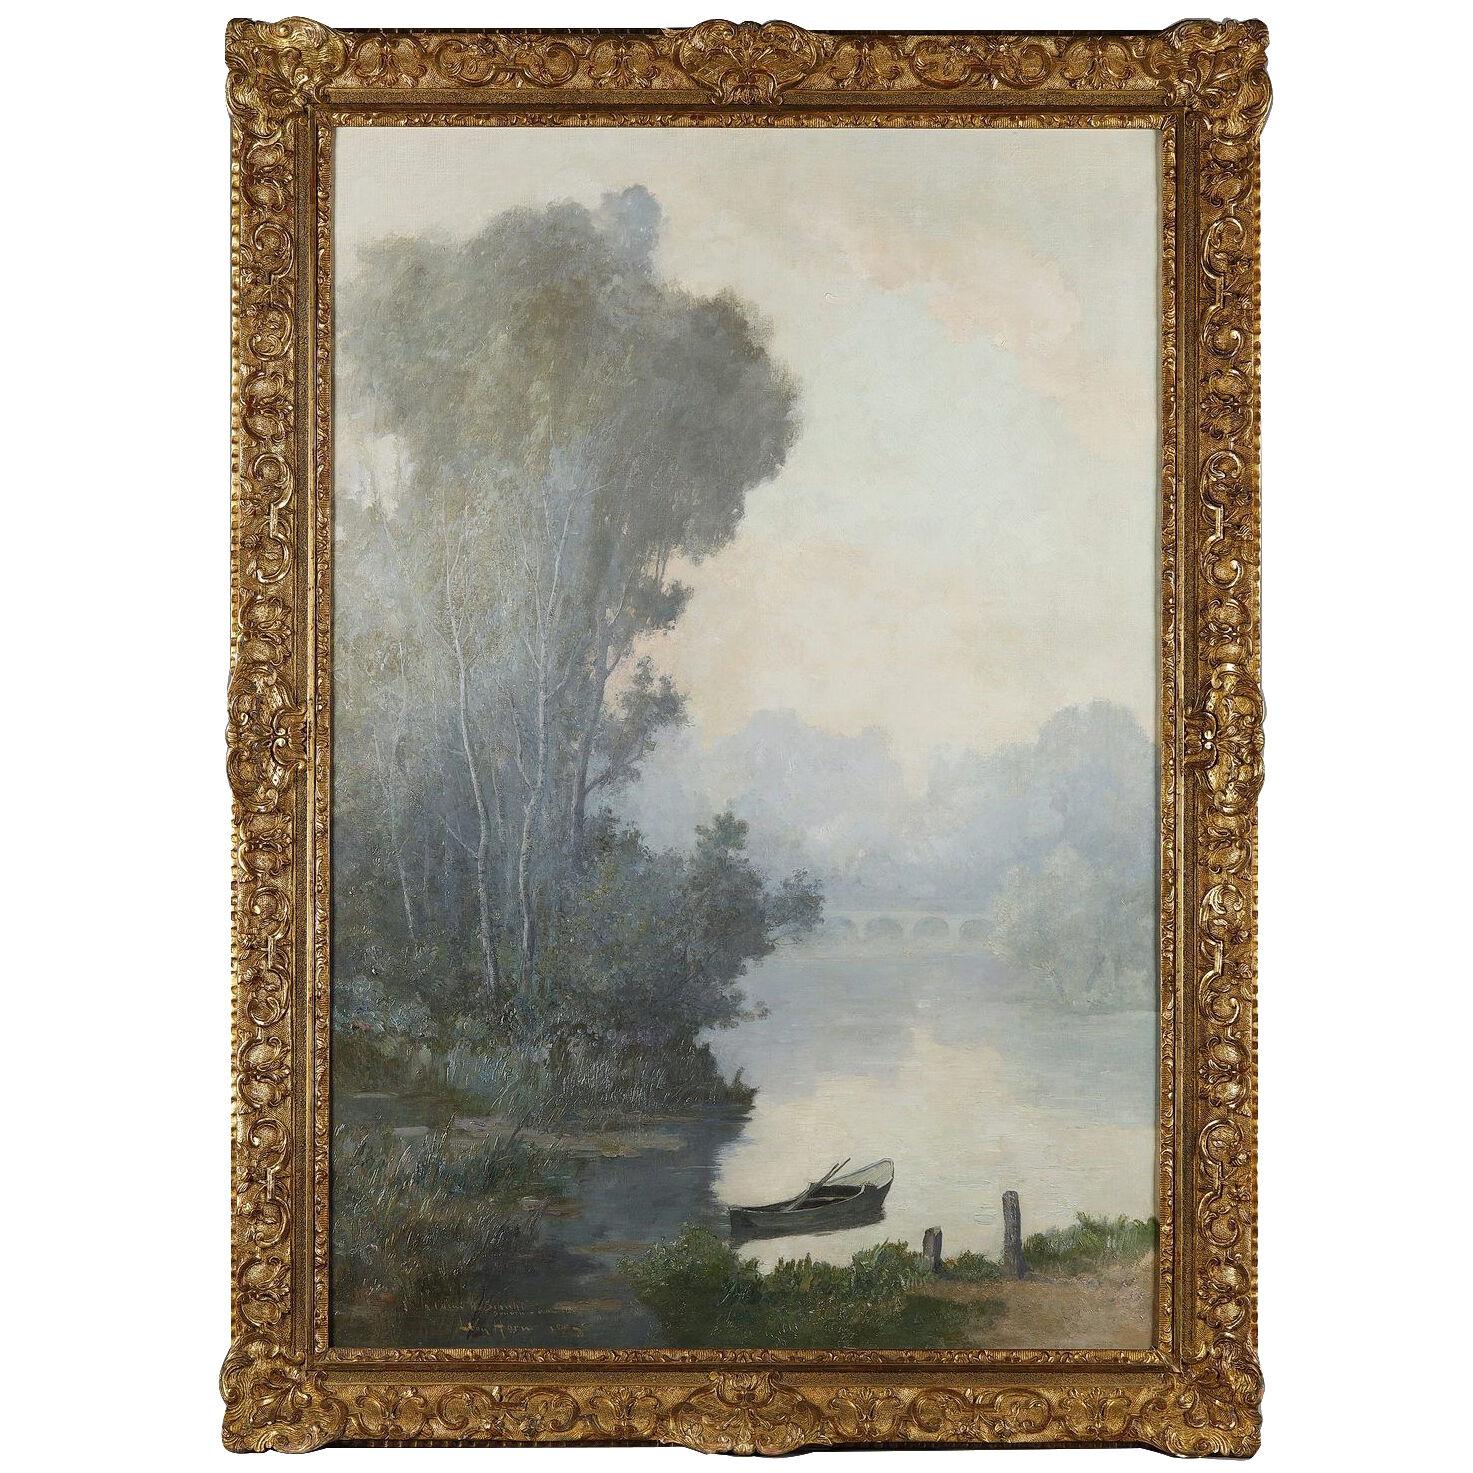 Large Landscape Painting "The Boat" by Leon Hornecker